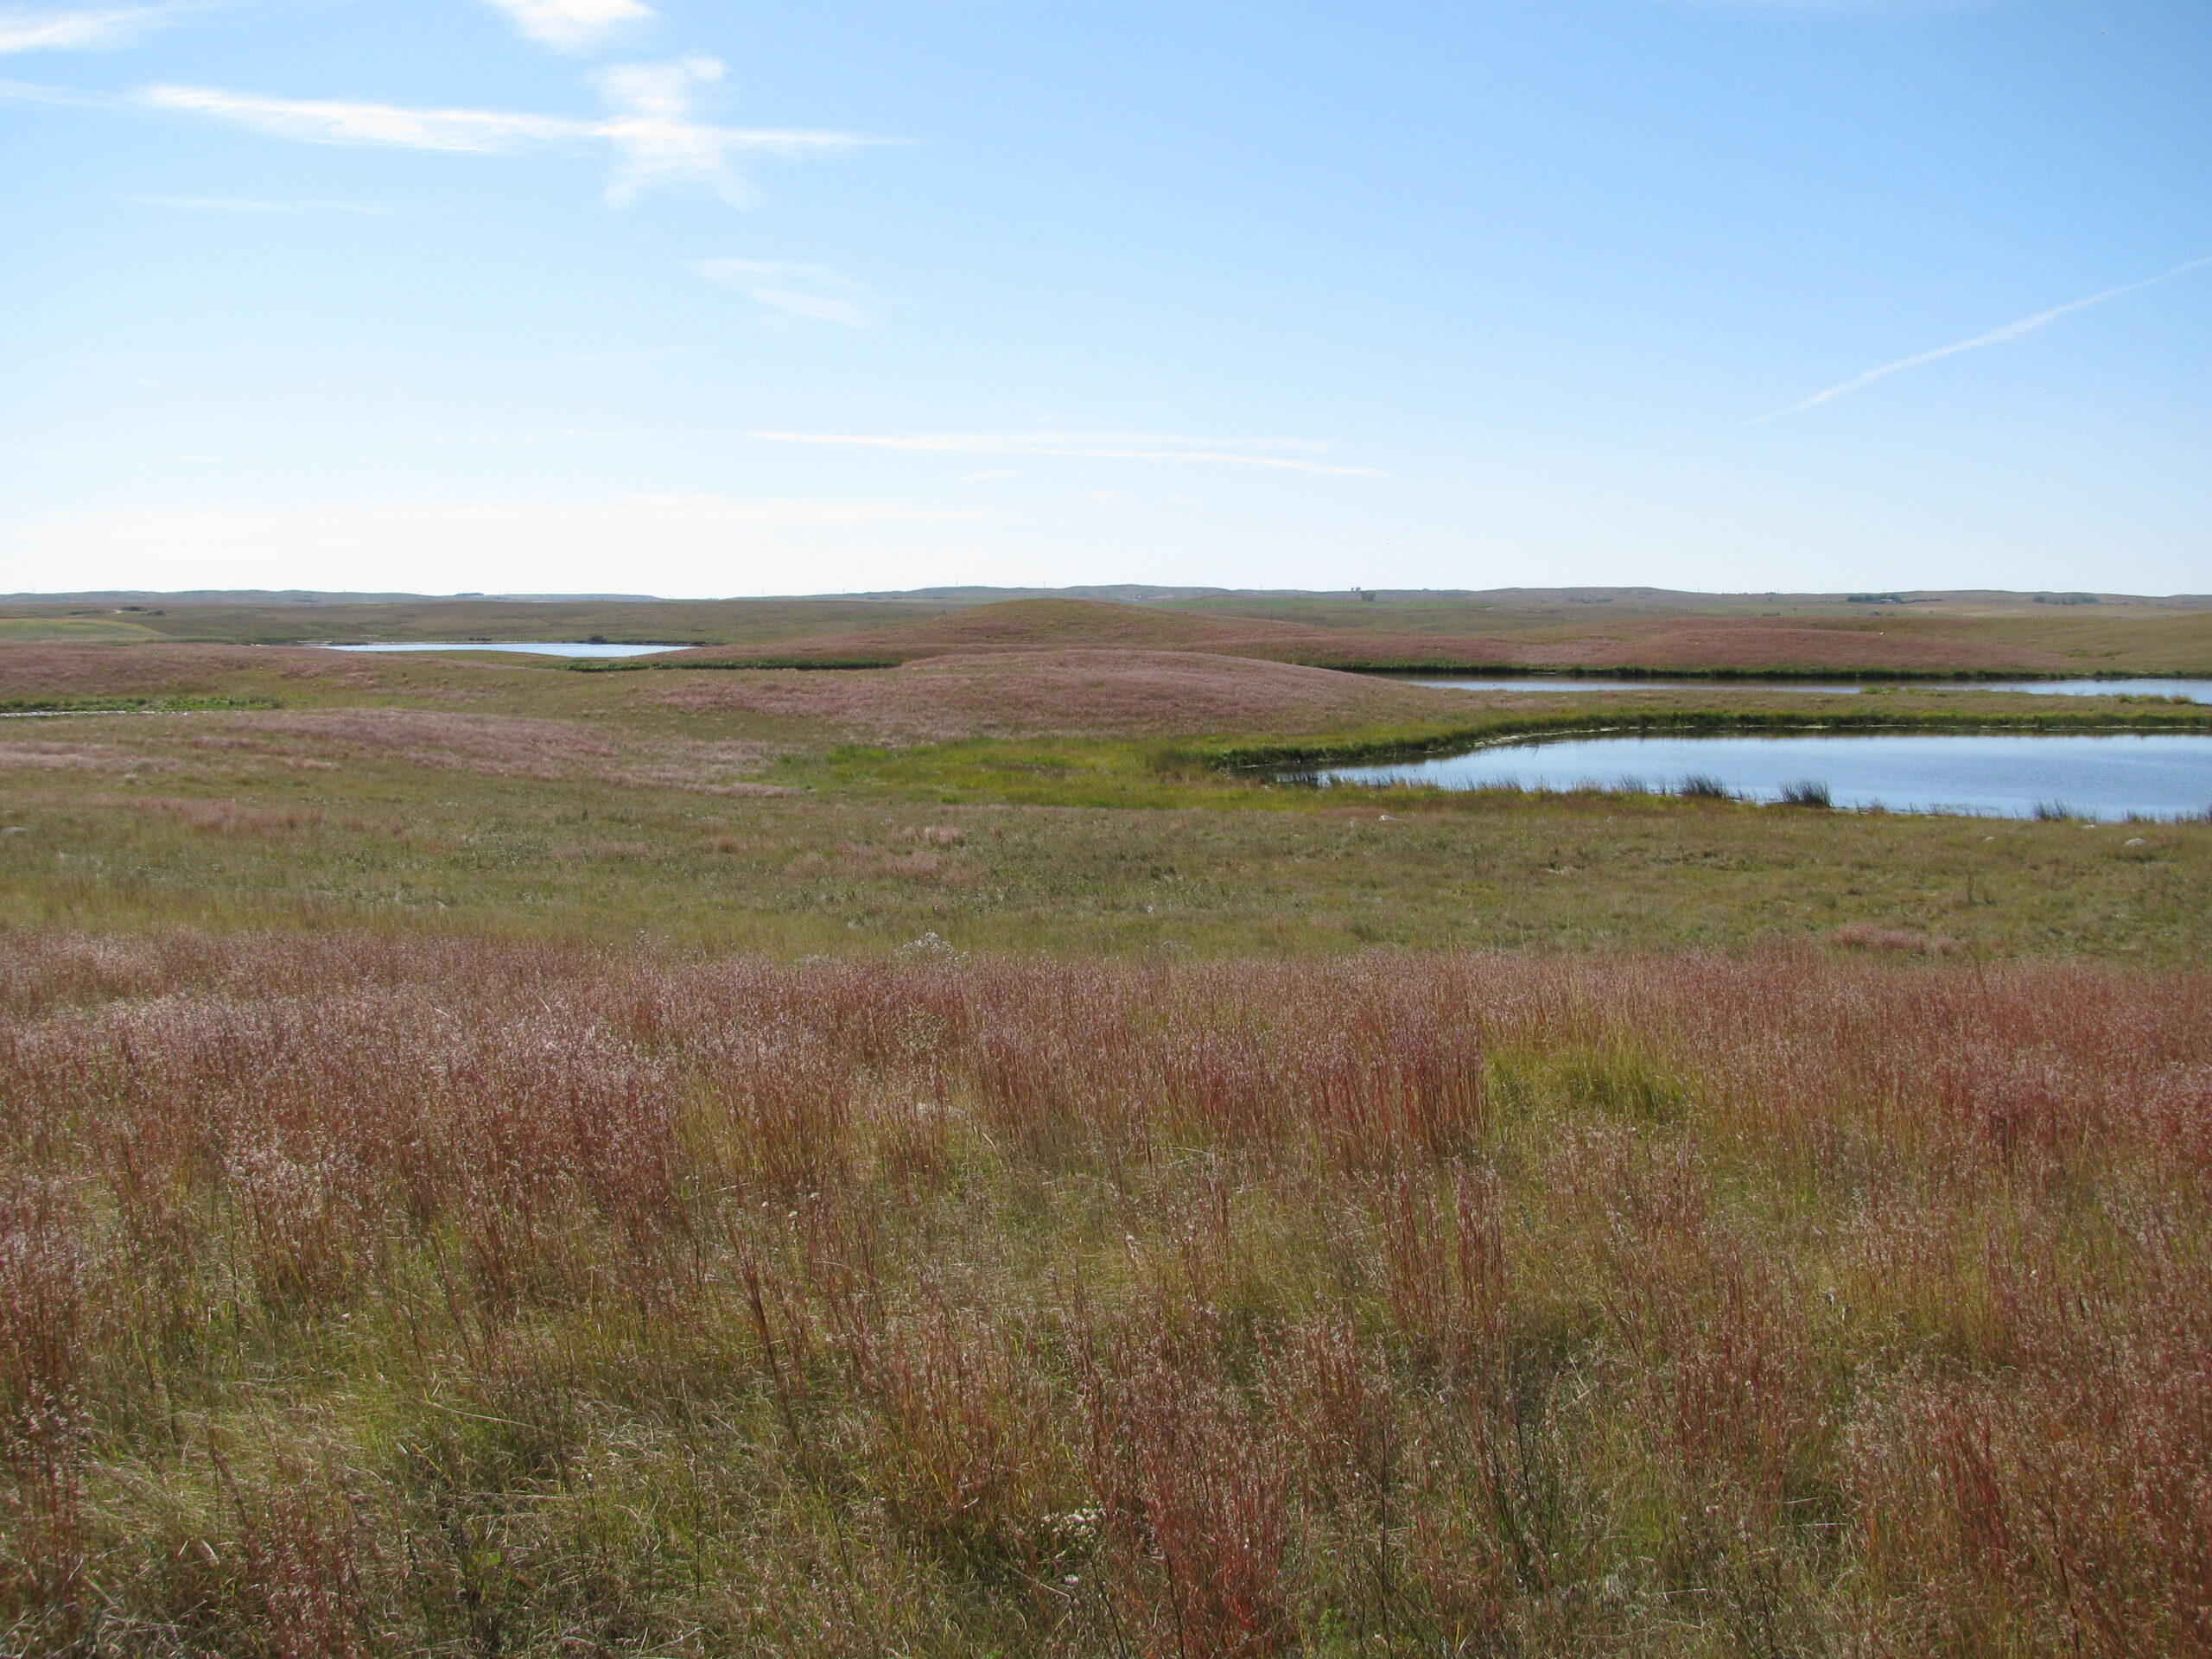 Photograph of mixed grass prairie in the United States. Little bluestem grass in the foreground, and a pond in the background.